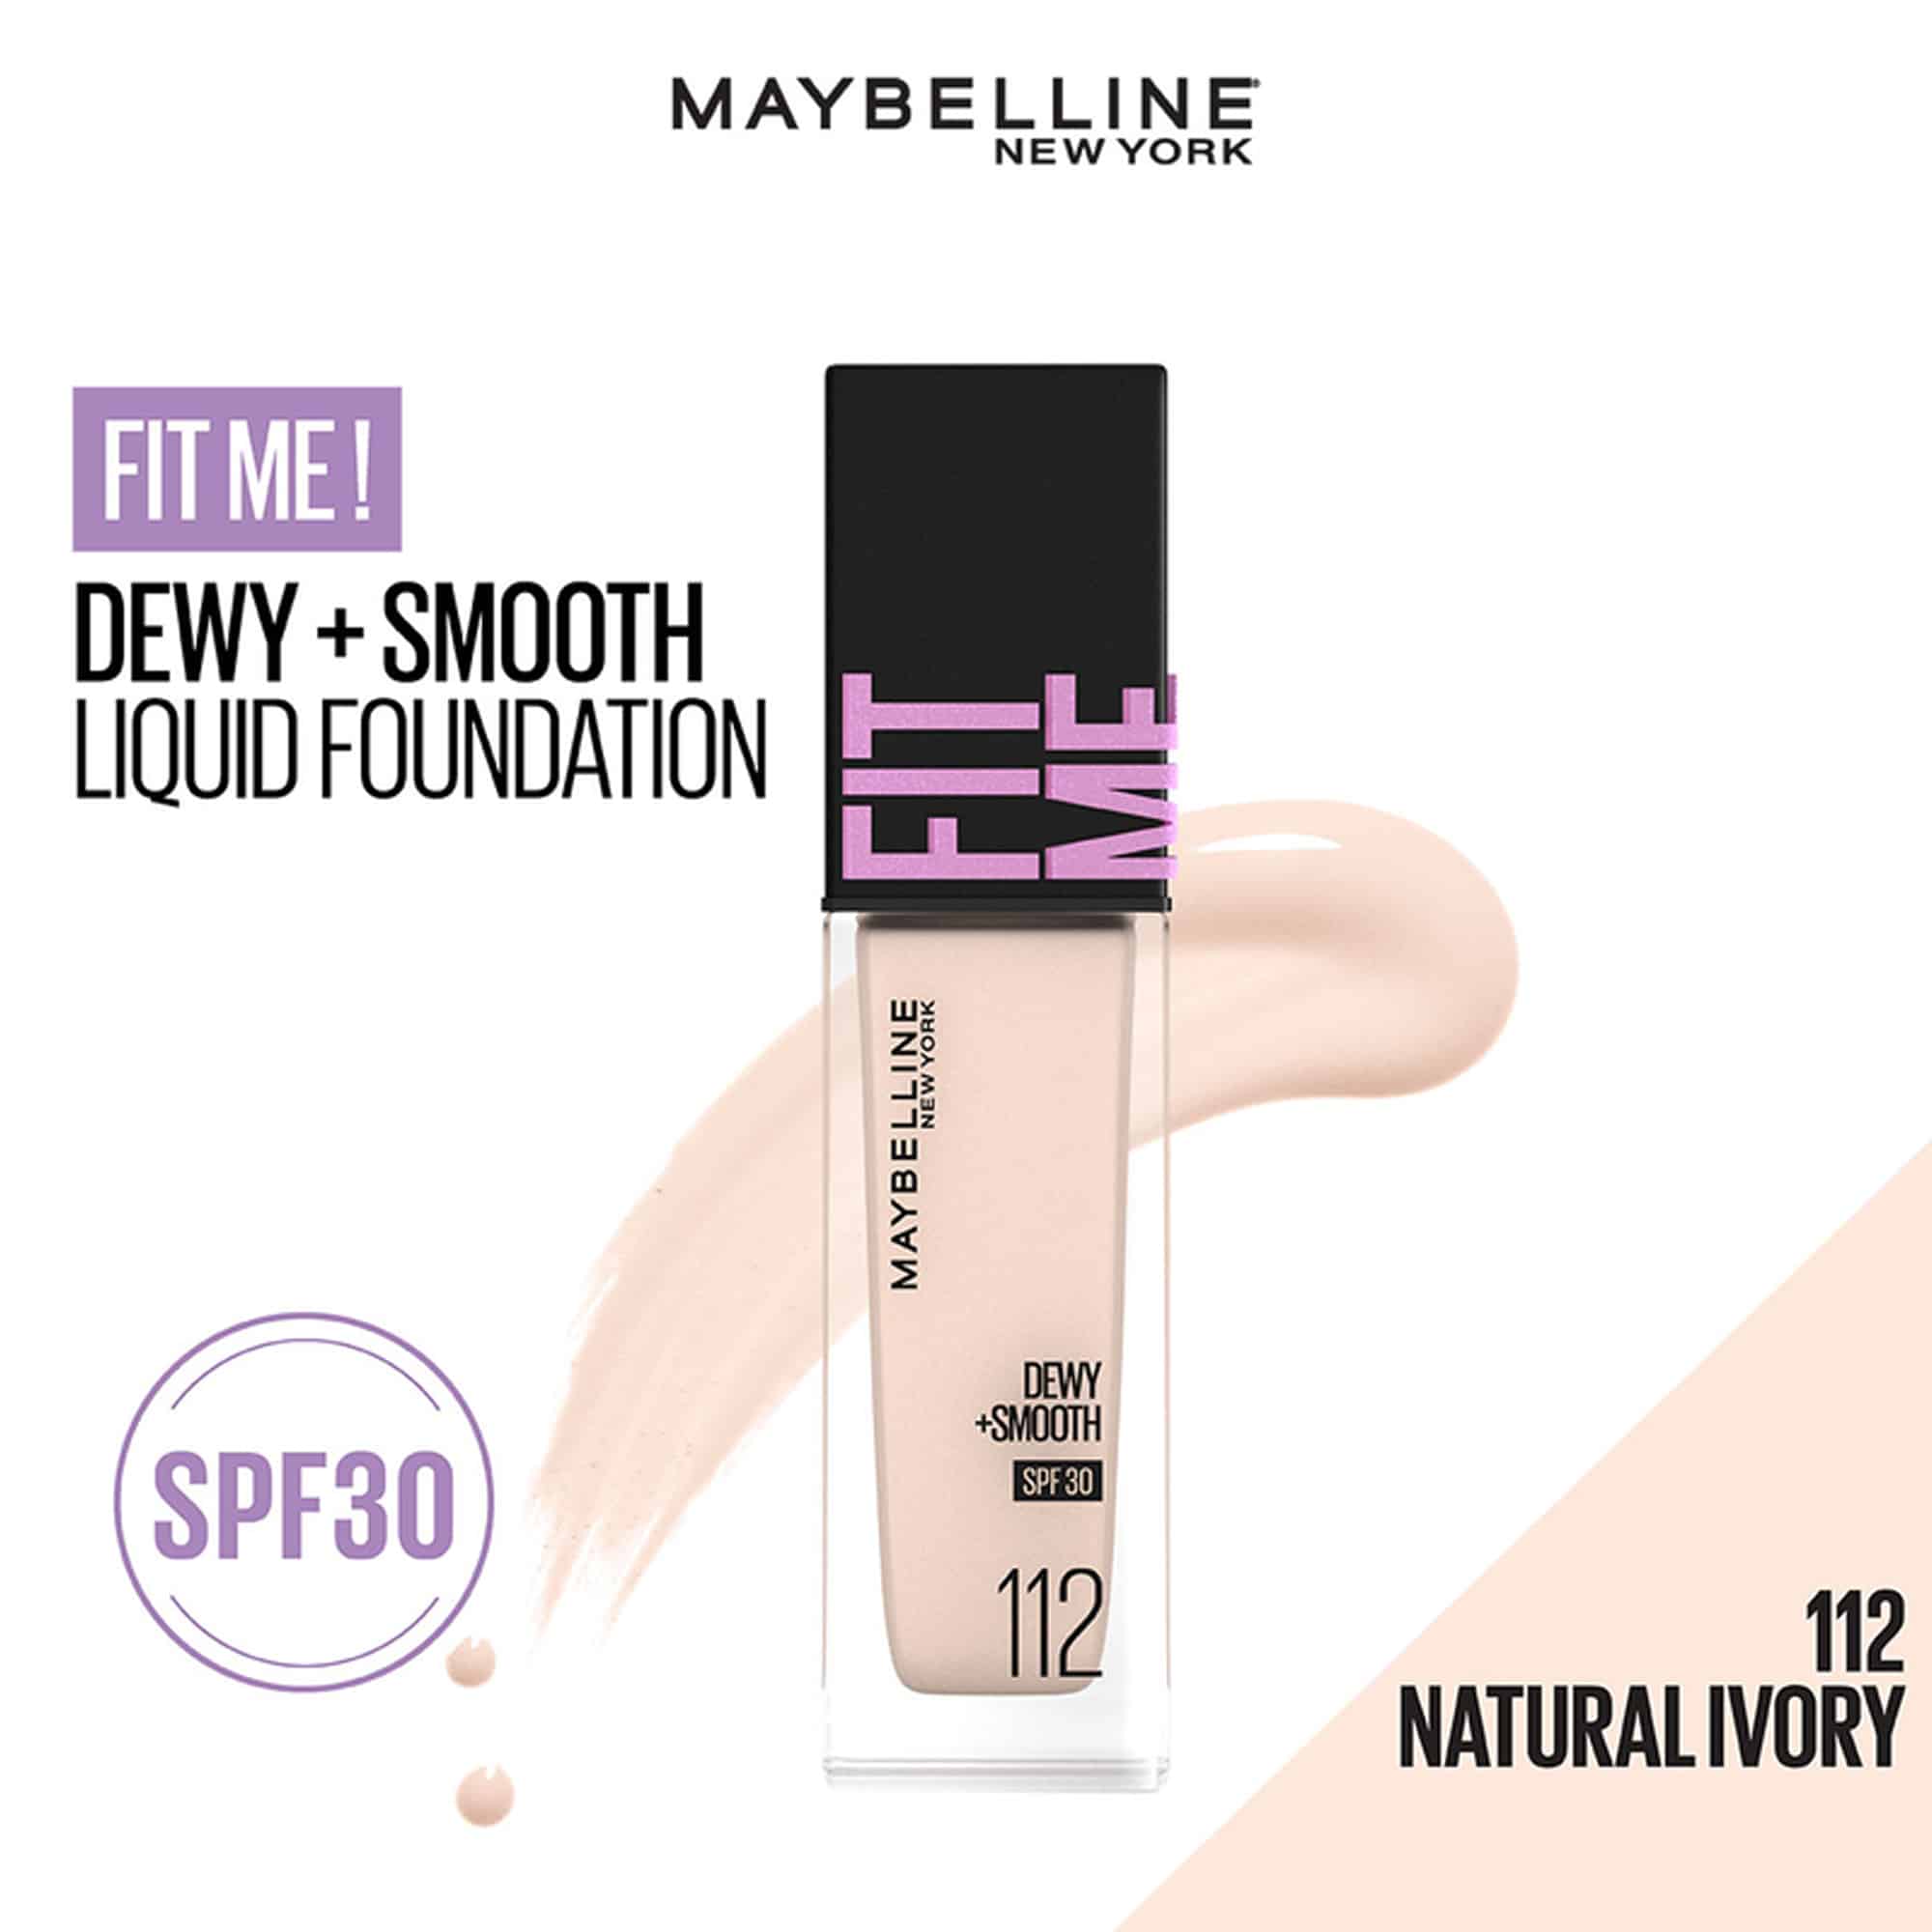 maybelline-new-york-fit-me-dewy-smooth-liquid-foundation-spf-30-112-natural-ivory-30ml_1